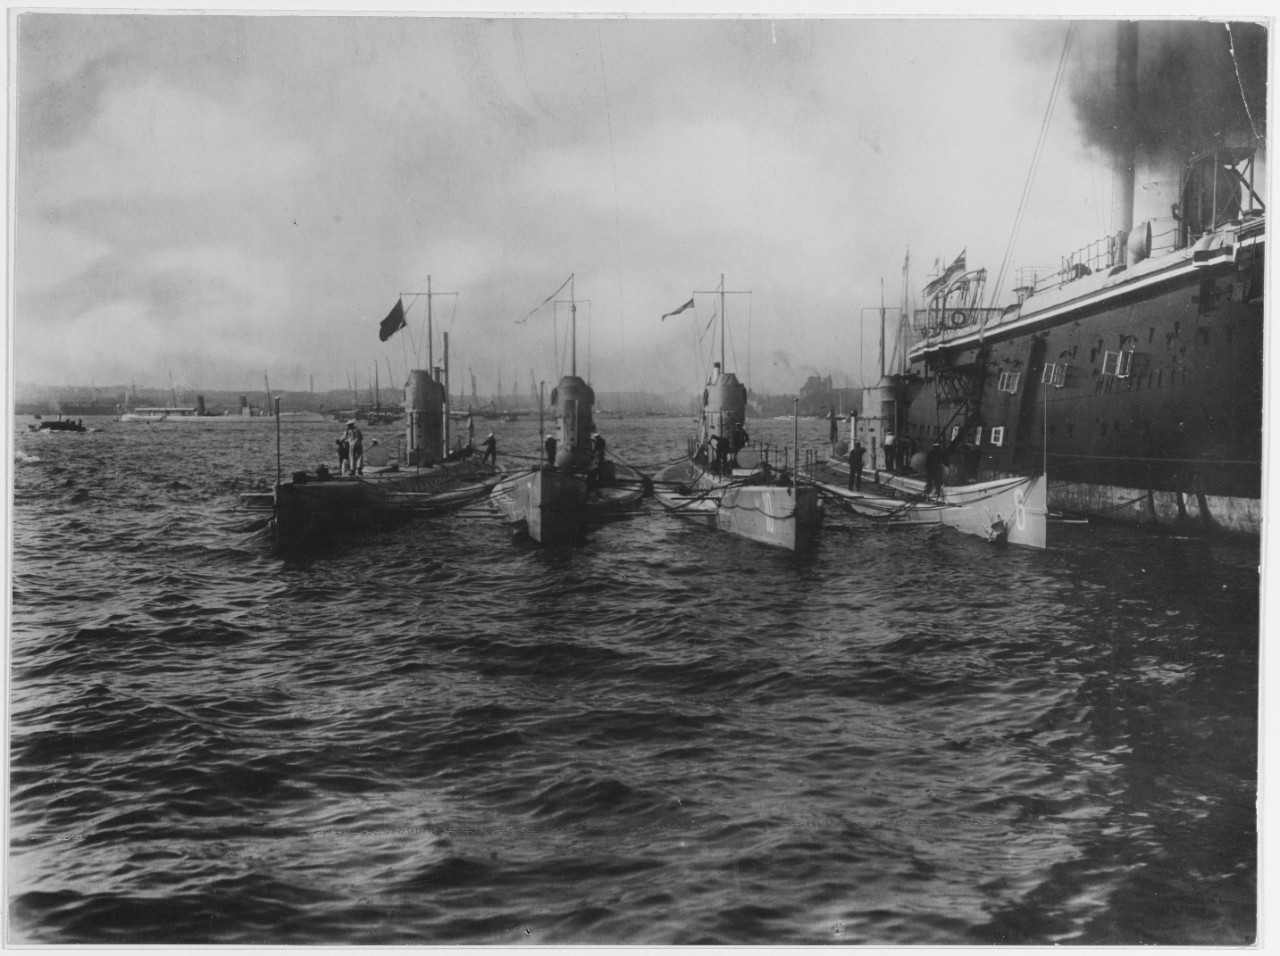 Four German submarines in about 1913